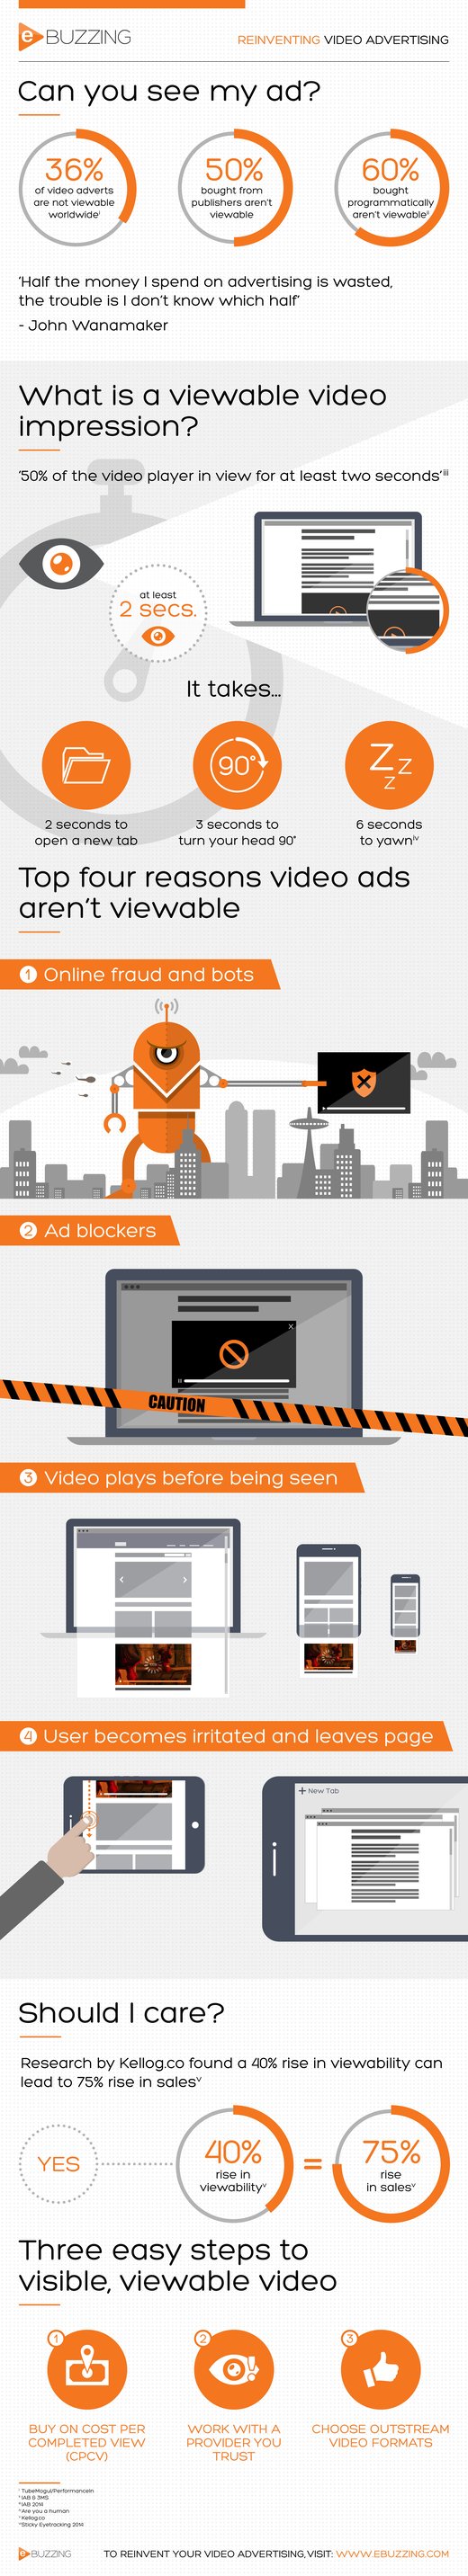 online video advertising infographic